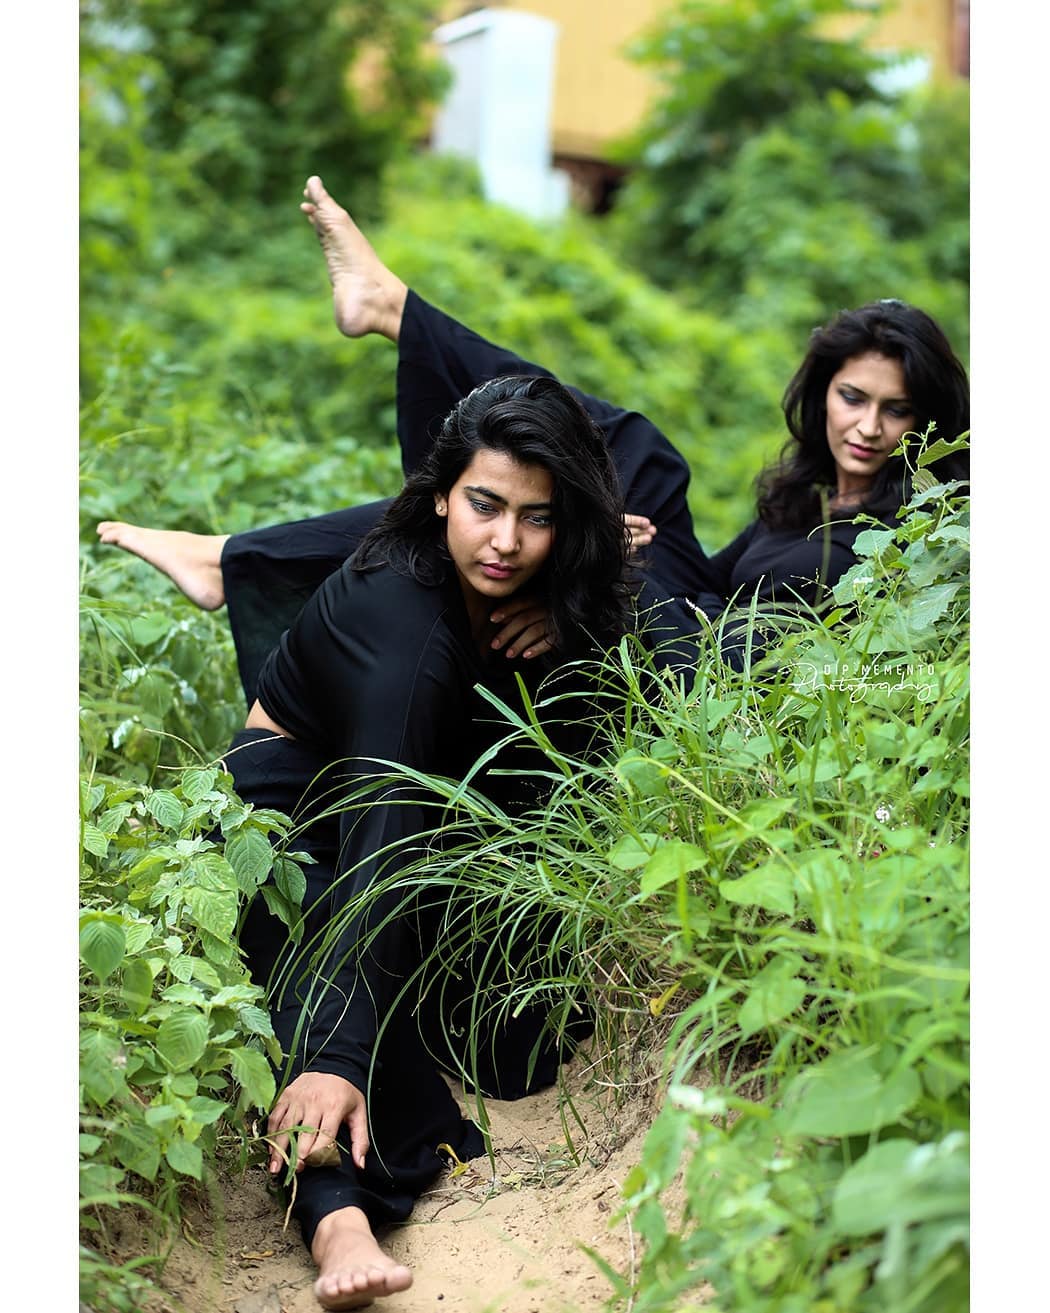 No one is you, and that is your superpower.
.
.

InFrame : 🍂Komal & 🍃Riddhi
.
.
Dance with Nature Concept Shoot.

Shoot By: @dip_memento_photography, ---------------*--------------*----------------*---------------*---------
#streetshoot #naturephotography #streetconceptshoot #conceptshoot #conceptphotoshoot #ahmedabad #dipmementophotography #dancephotography
#dslrofficial  #dance #photooftheday #portraitsofficial #50mm  #picoftheday  #girl #indiafeature #keeptagging #9924227745 #_ip #_ig  #bestoftheday #danceshoot #naturelovers
#indiaportraits #indiaportraits #sun #keepdancing